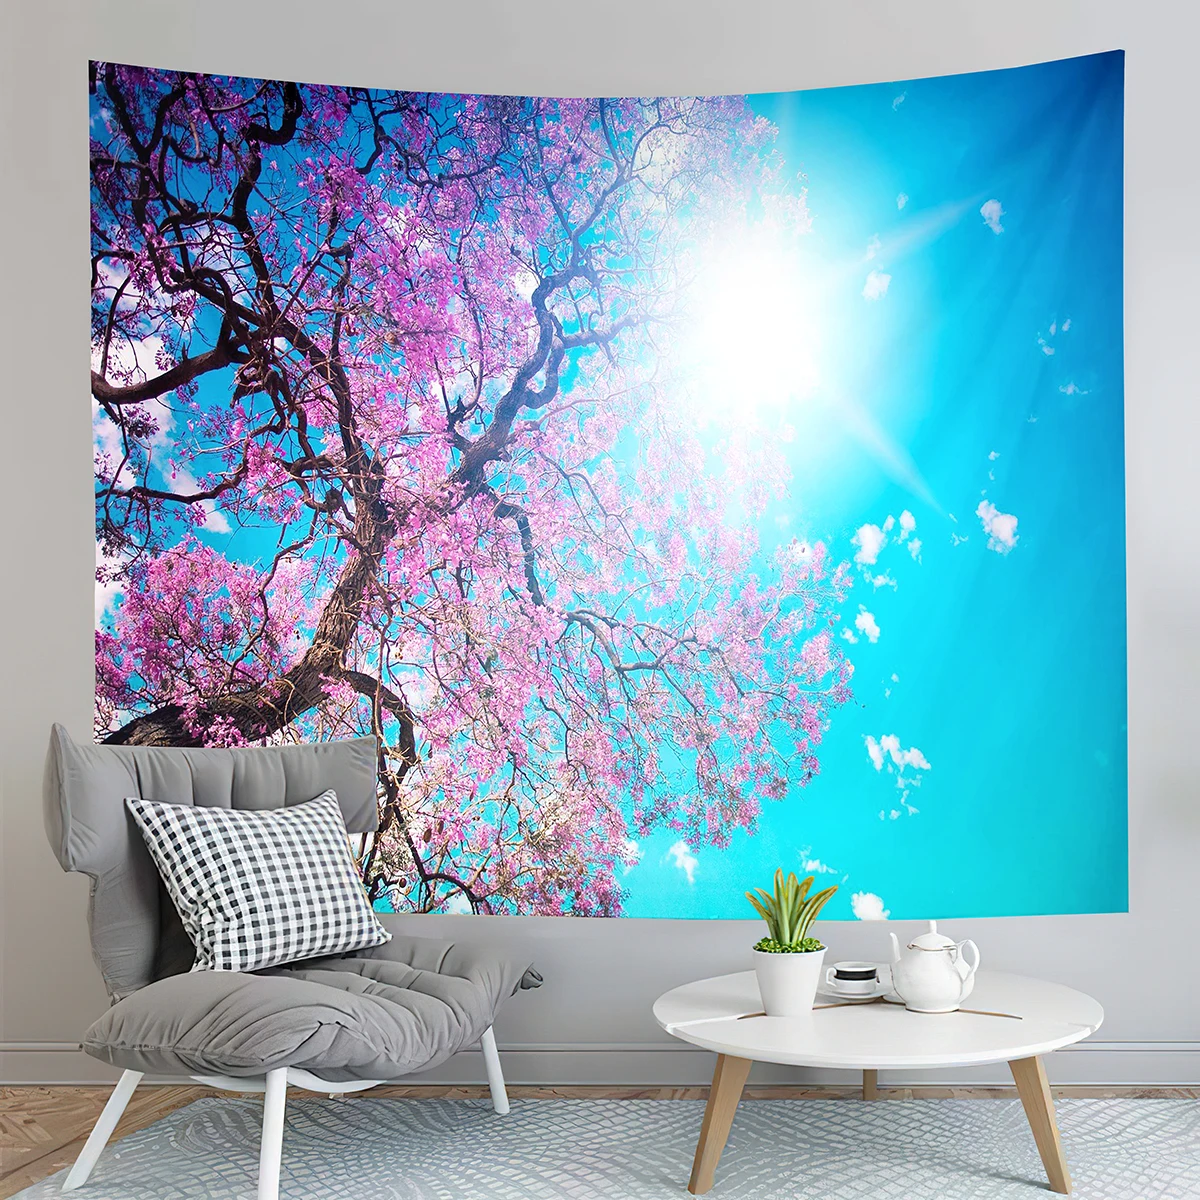 

Japan Tokyo Cherry Blossoms Tapestry Blue Sky Pink Flowers Tapestry Art Wall Hanging Home Living Room Bedroom Dorm Tapestries